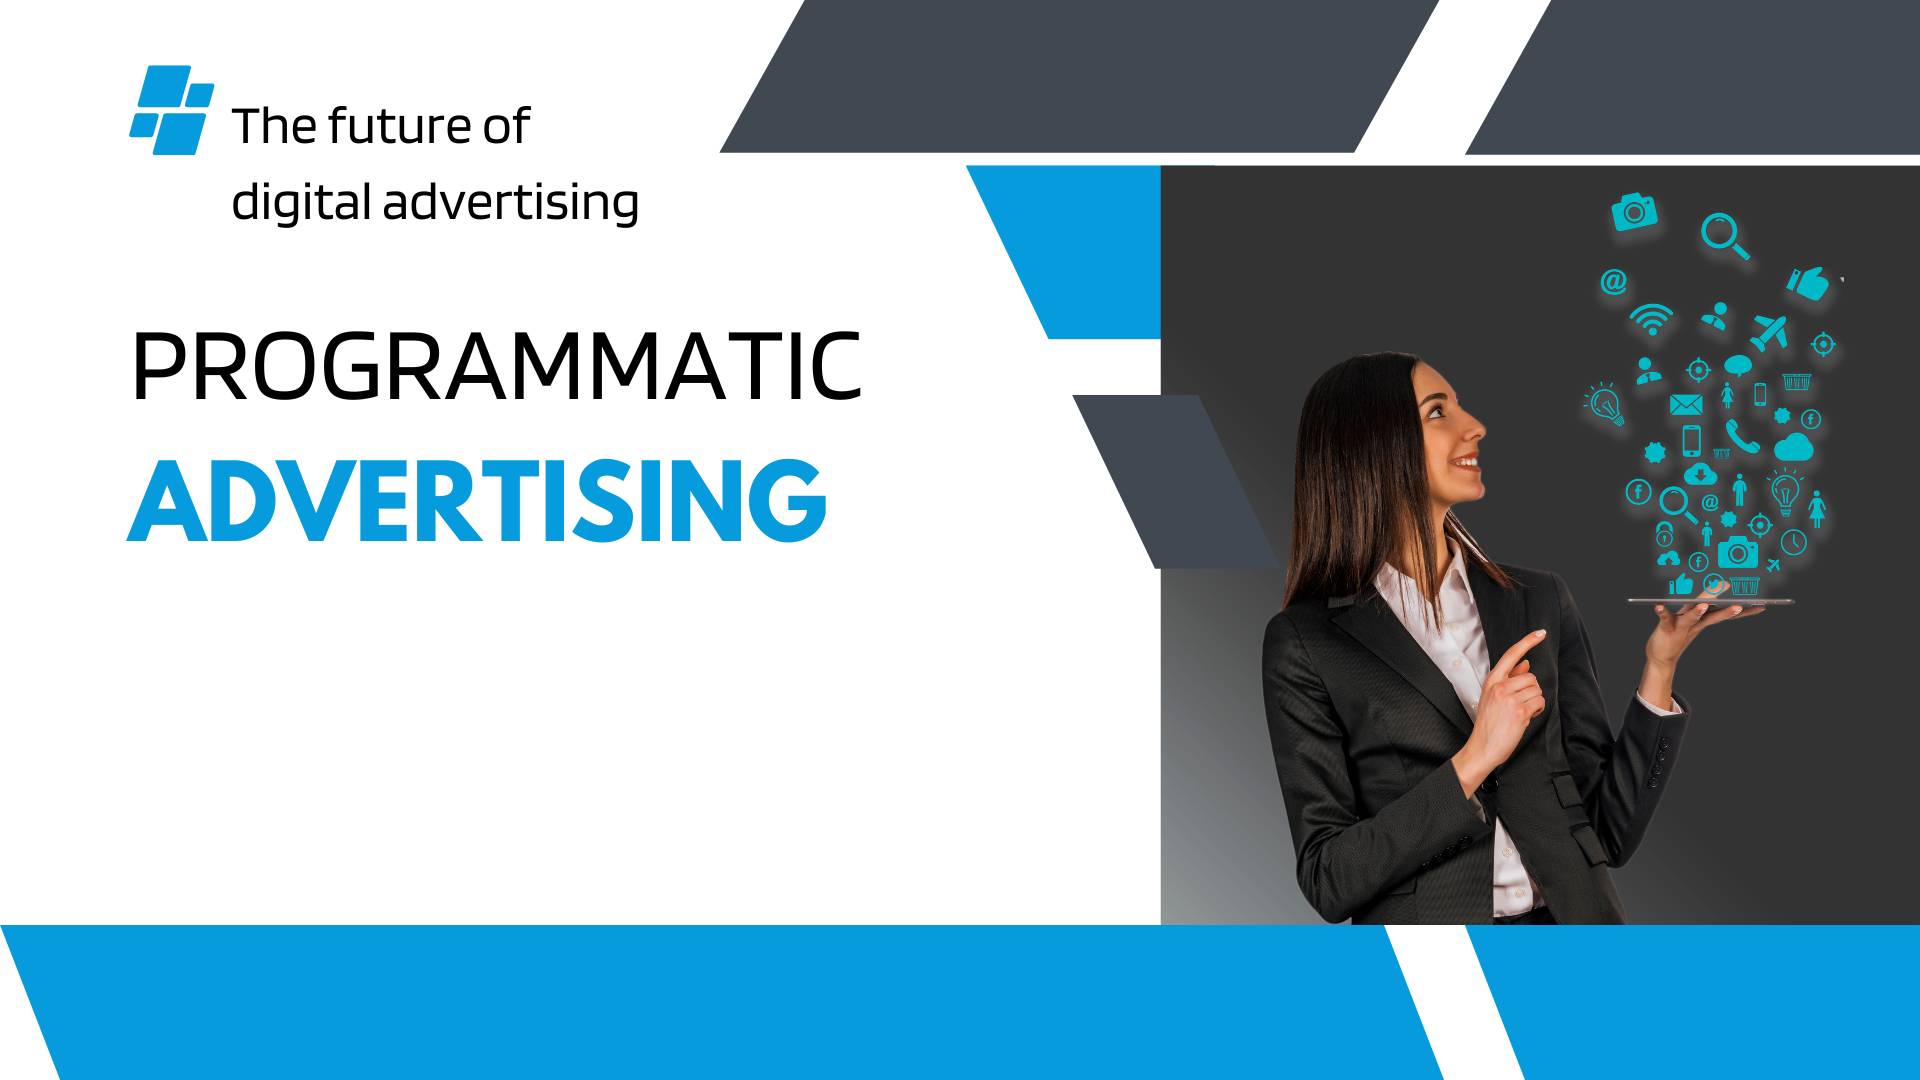 programmatic advertising is the future of digital ad industry